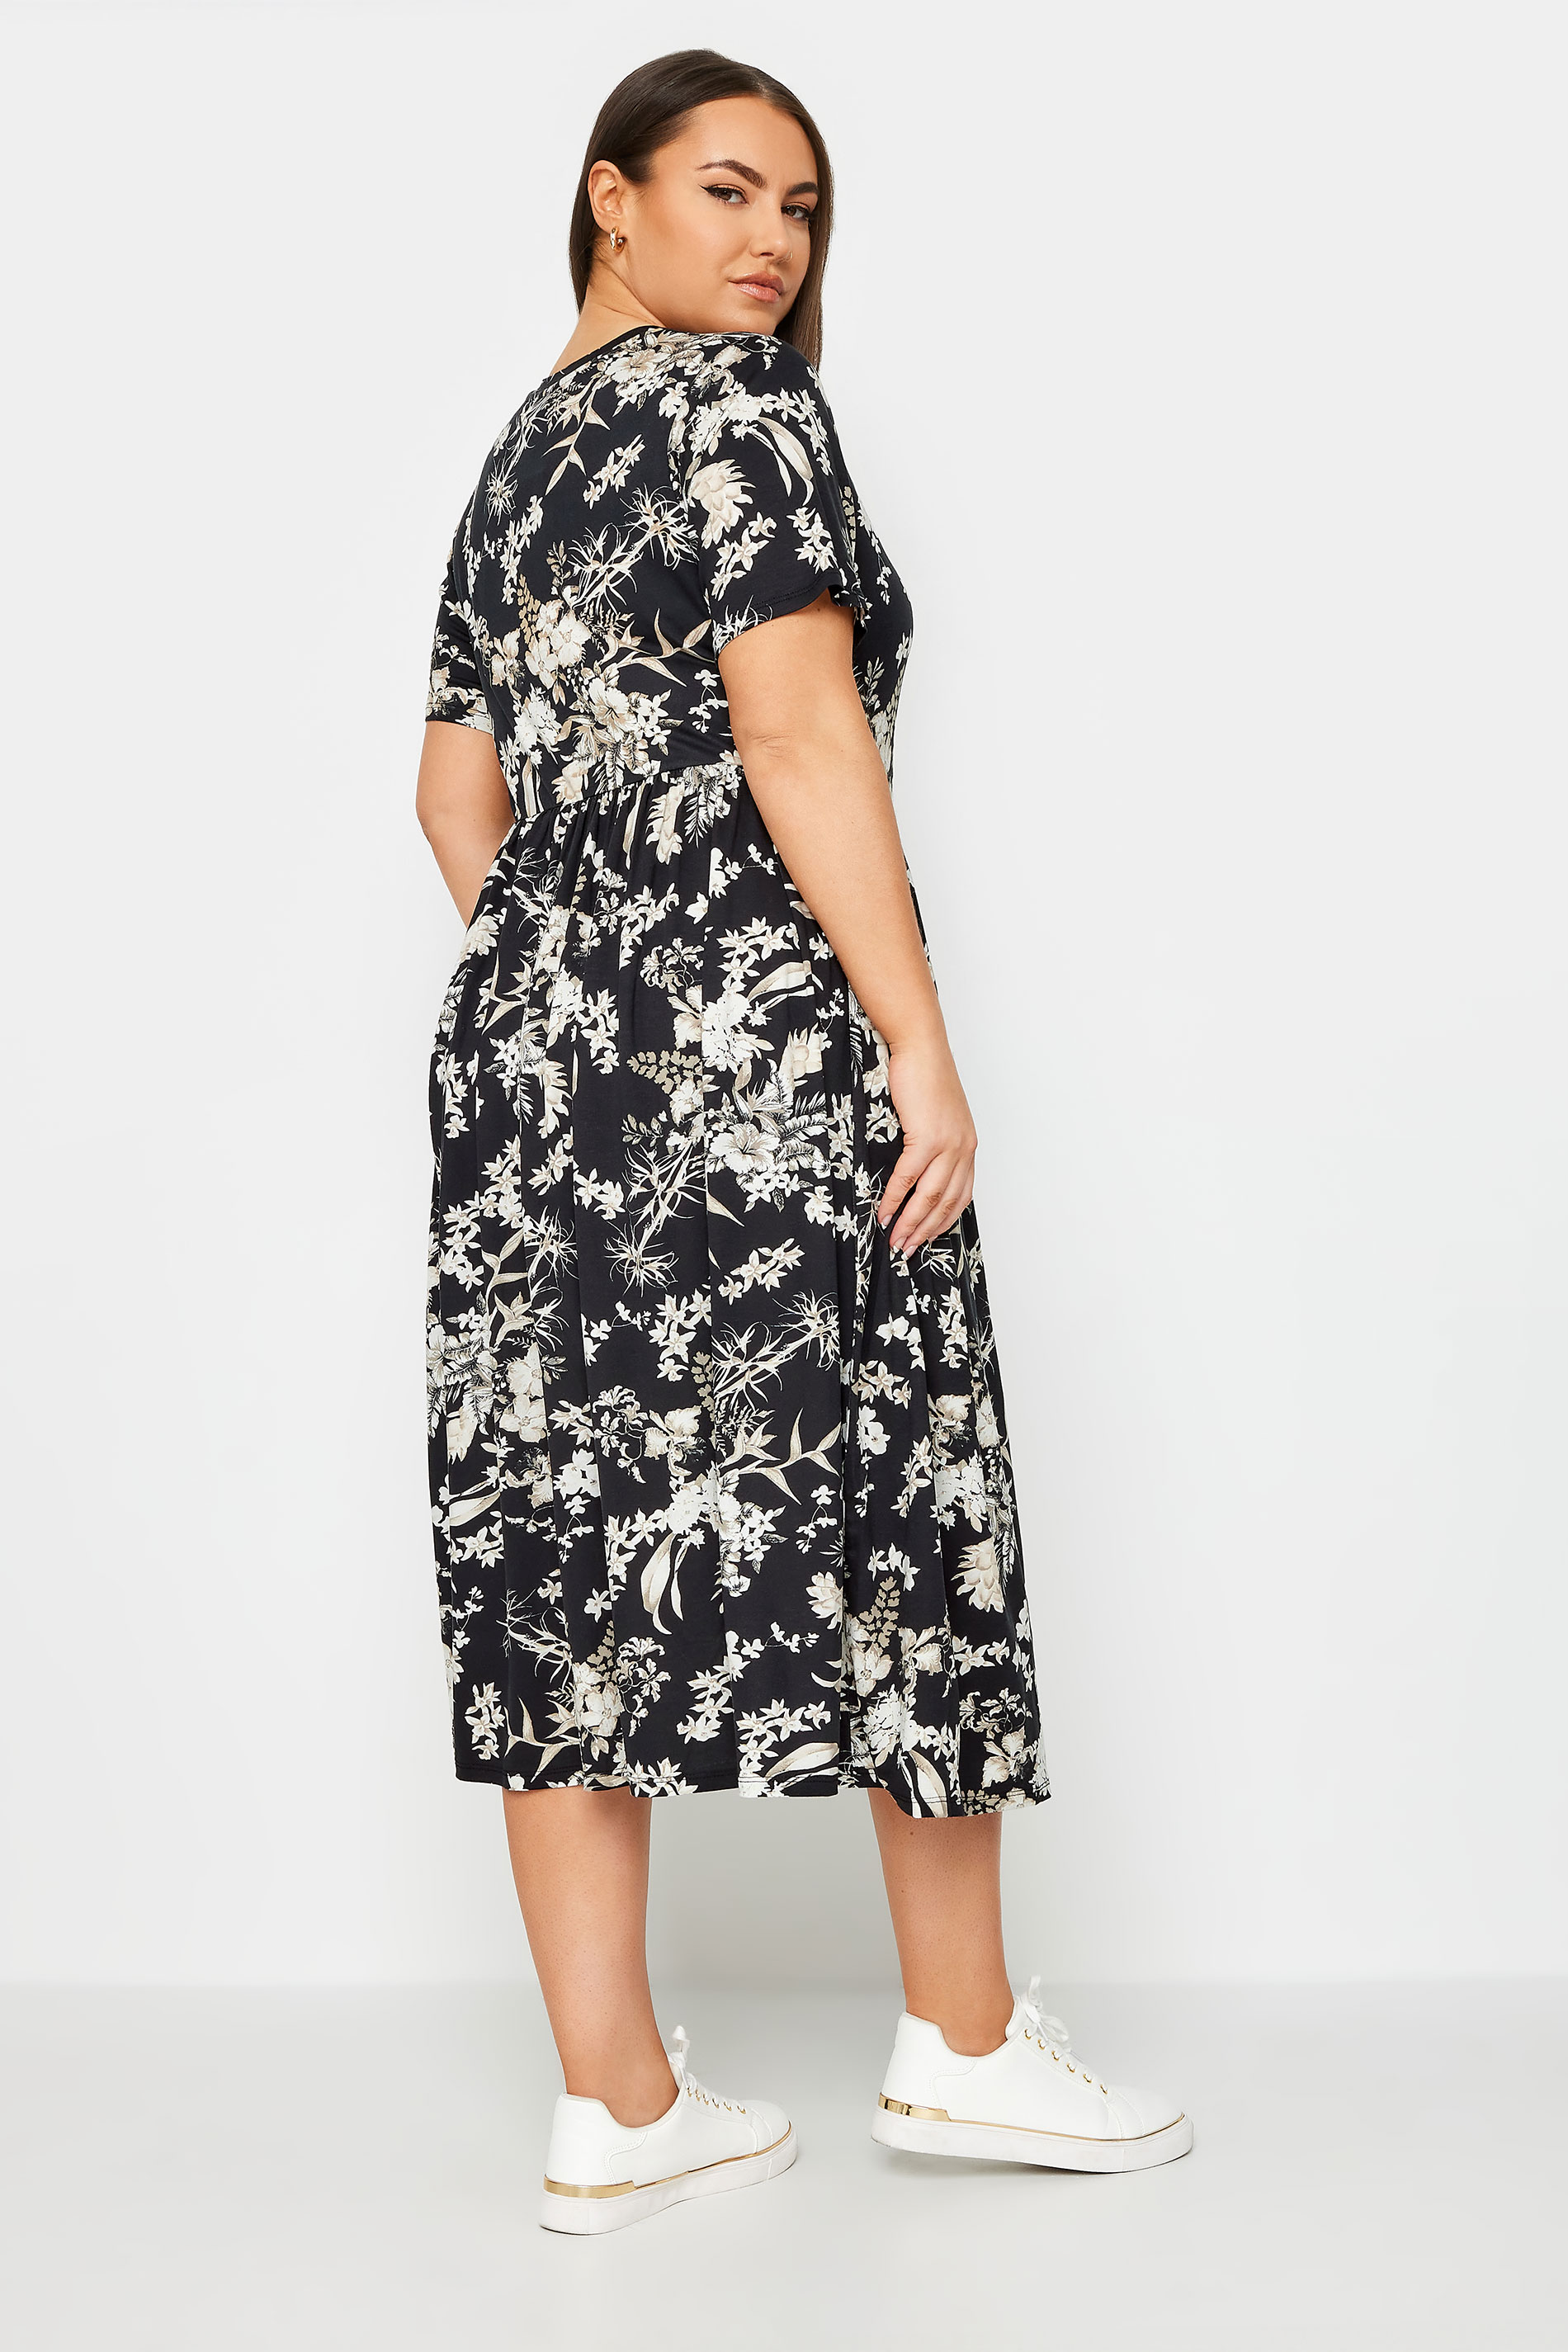 YOURS Plus Size Black Floral Print Midaxi Dress | Yours Clothing 3